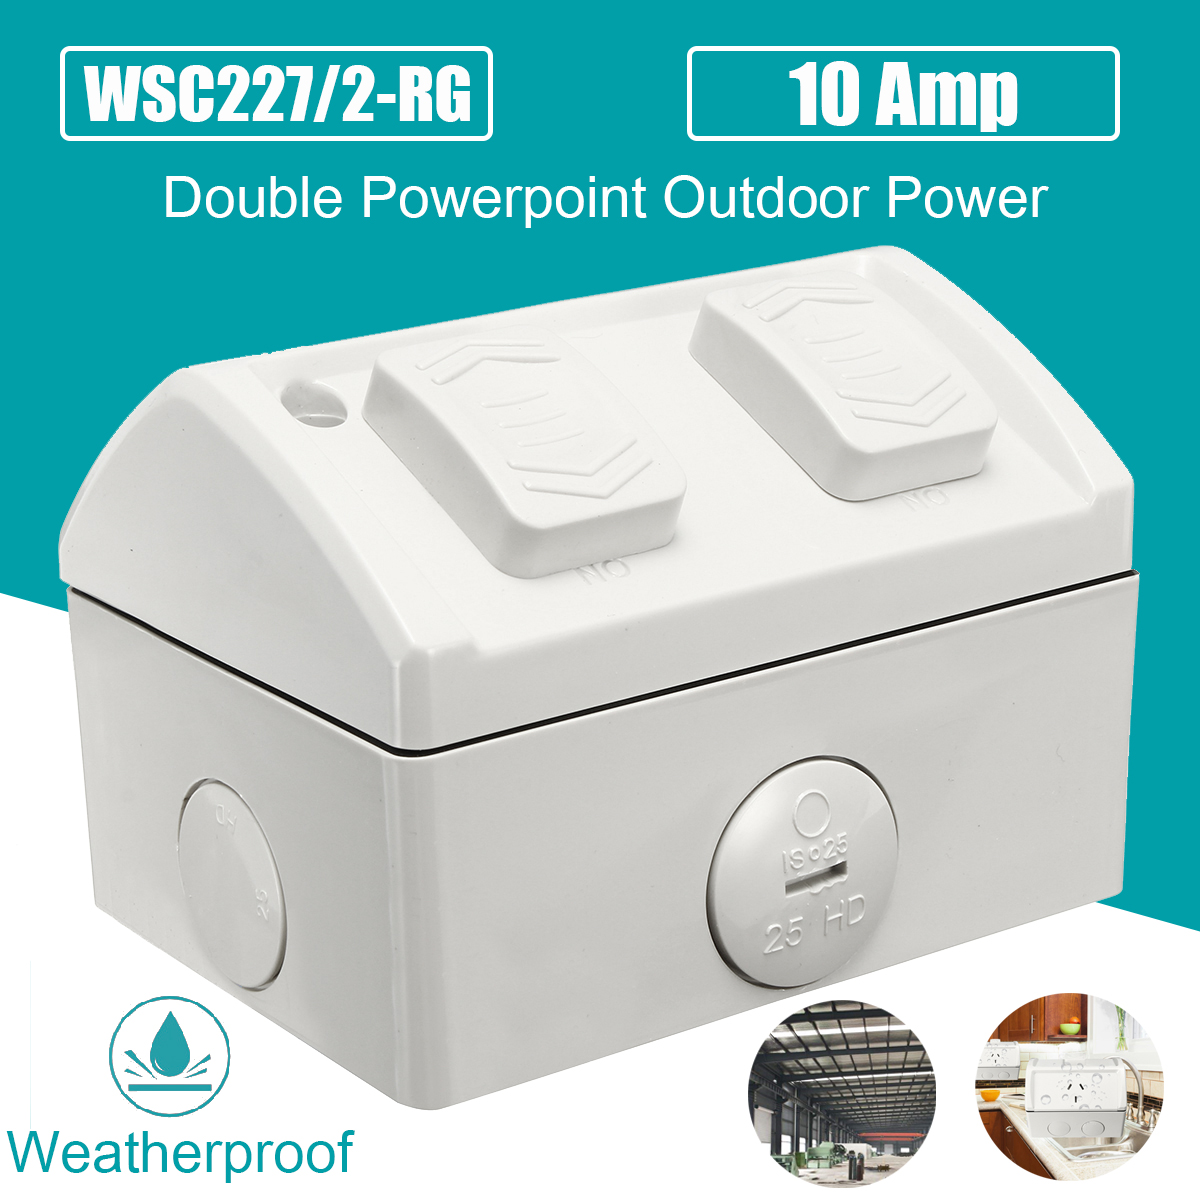 10A-Weatherproof-Double-Powerpoint-Outdoor-Power-Outlet-Switch-Socket-AU-1310264-3